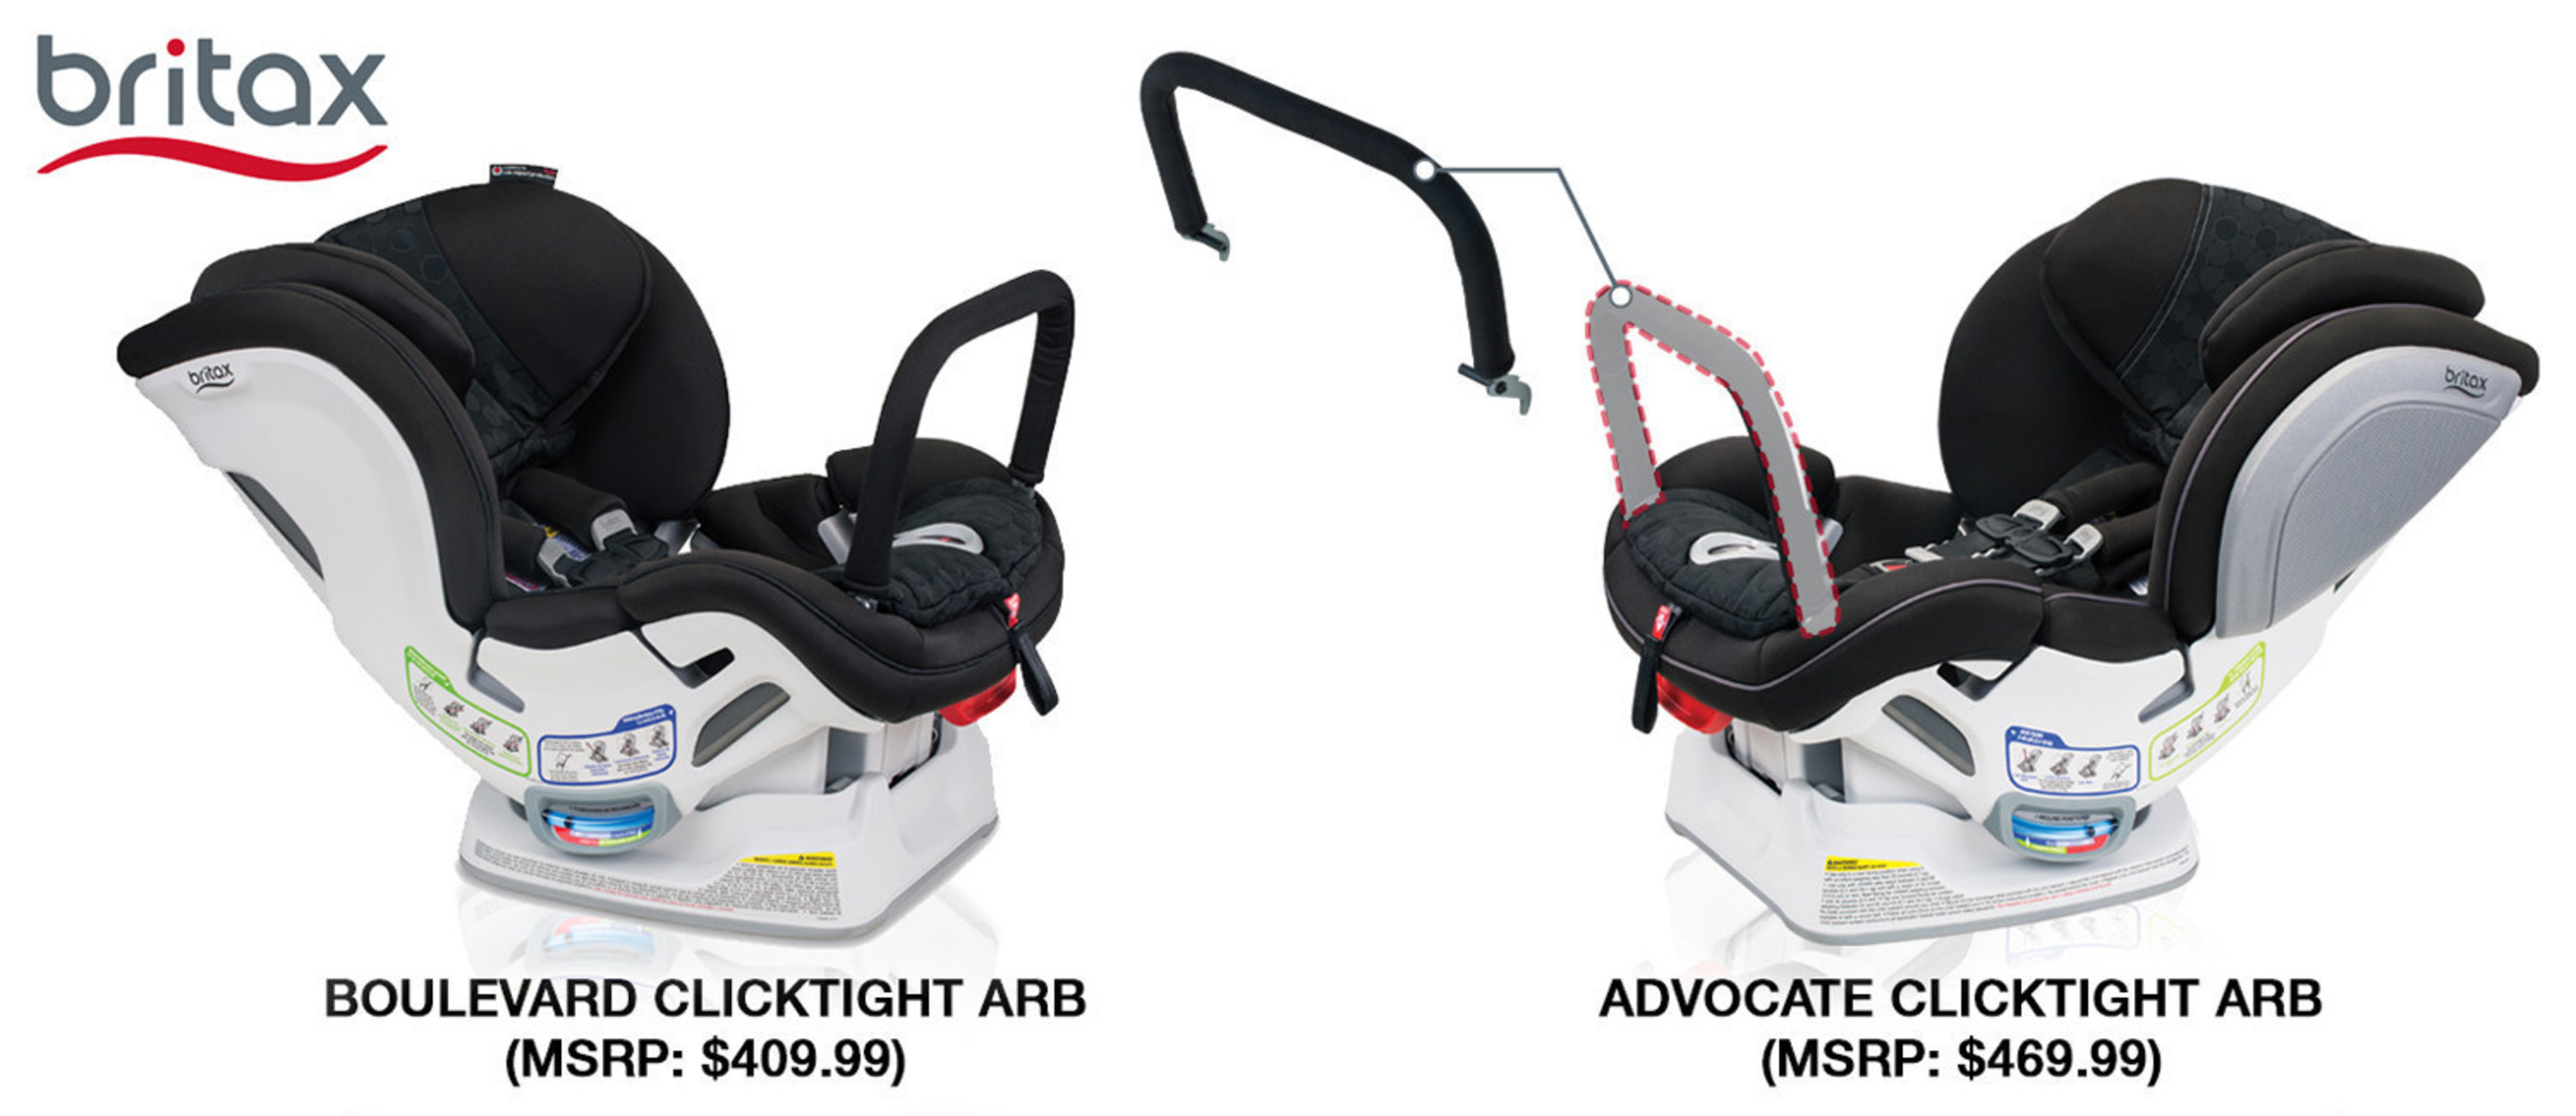 Britax Raises the Bar in Rear-Facing Safety with the Anti-Rebound Bar, providing advanced protection for rear-facing children by increasing stability, reducing rotation and lowering risk of injury